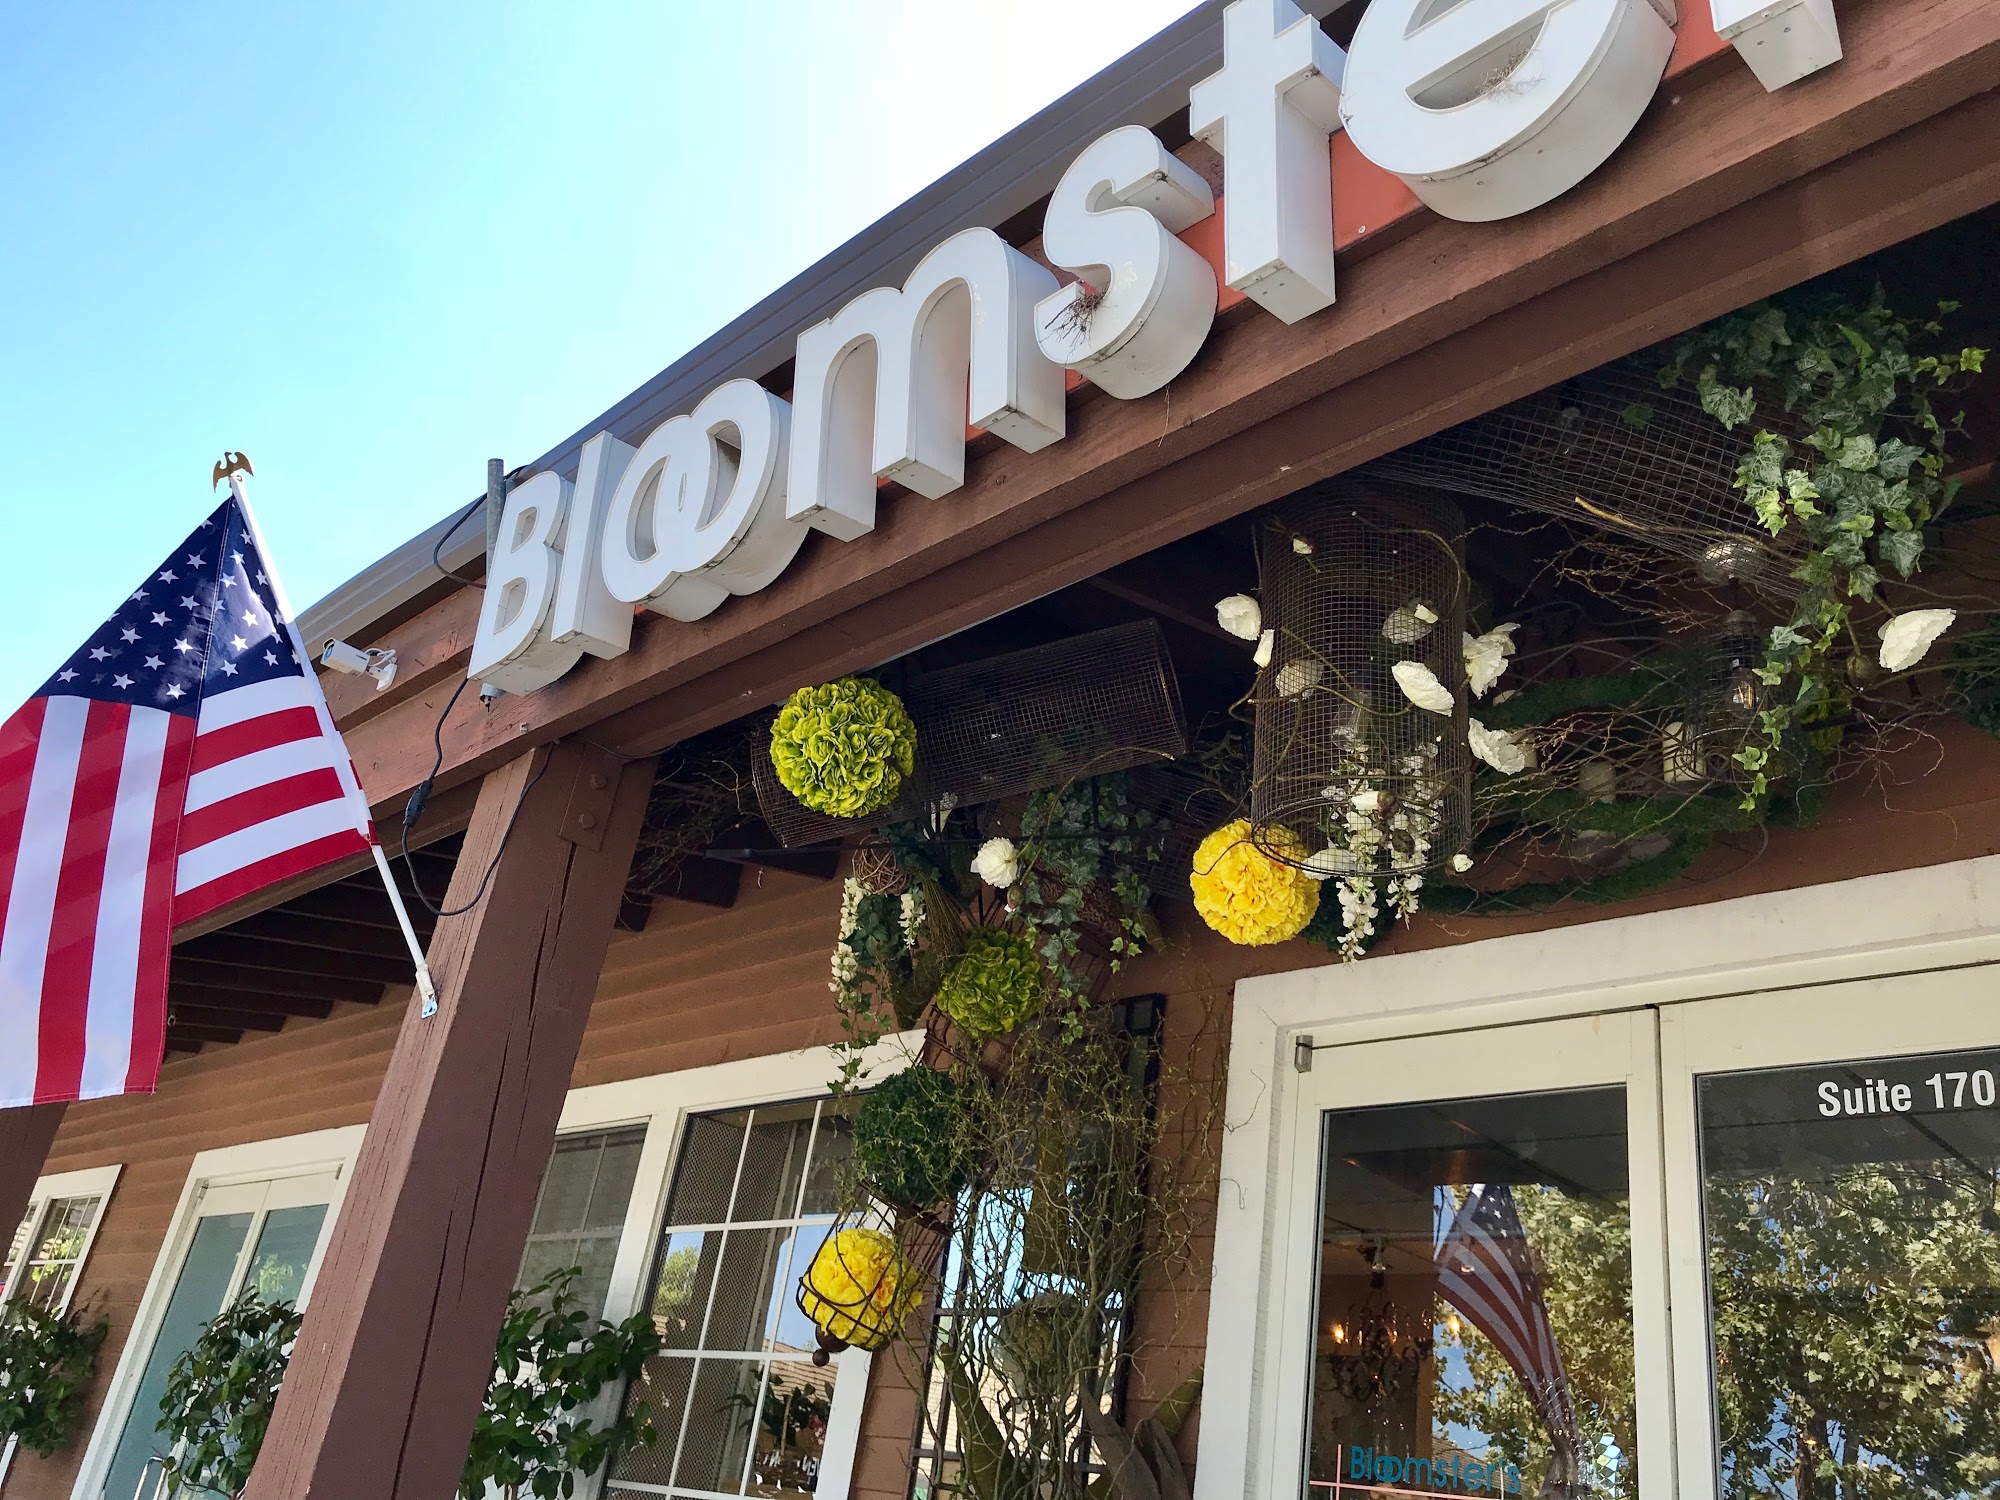 Bloomster's